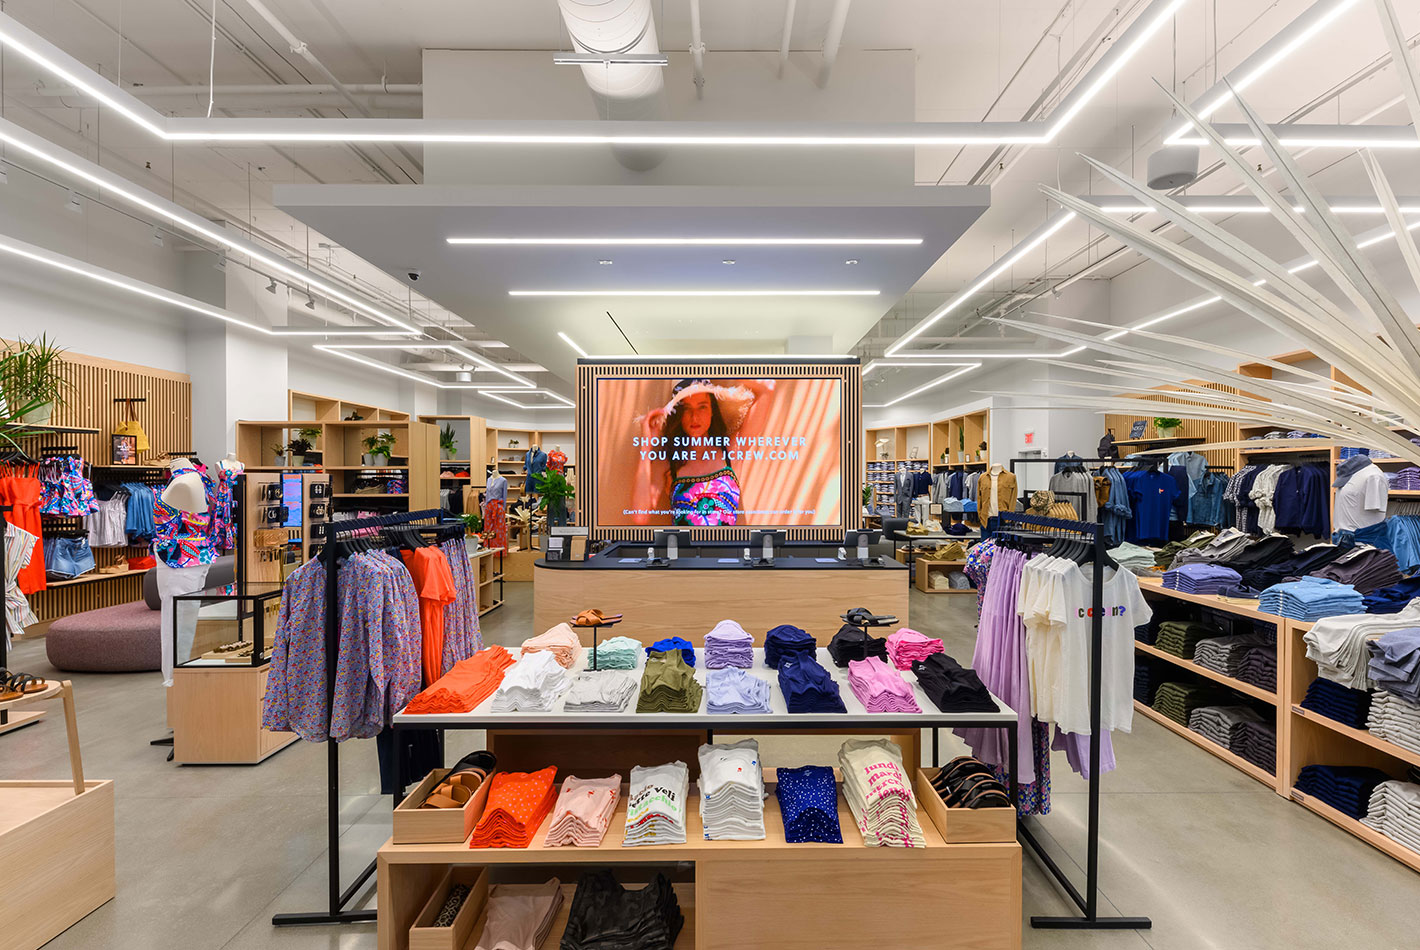 Innovative rectangular light fixtures hang from the ceiling at the cashier's desk of J Crew's newly designed store. New oak shelving holds the women's collection